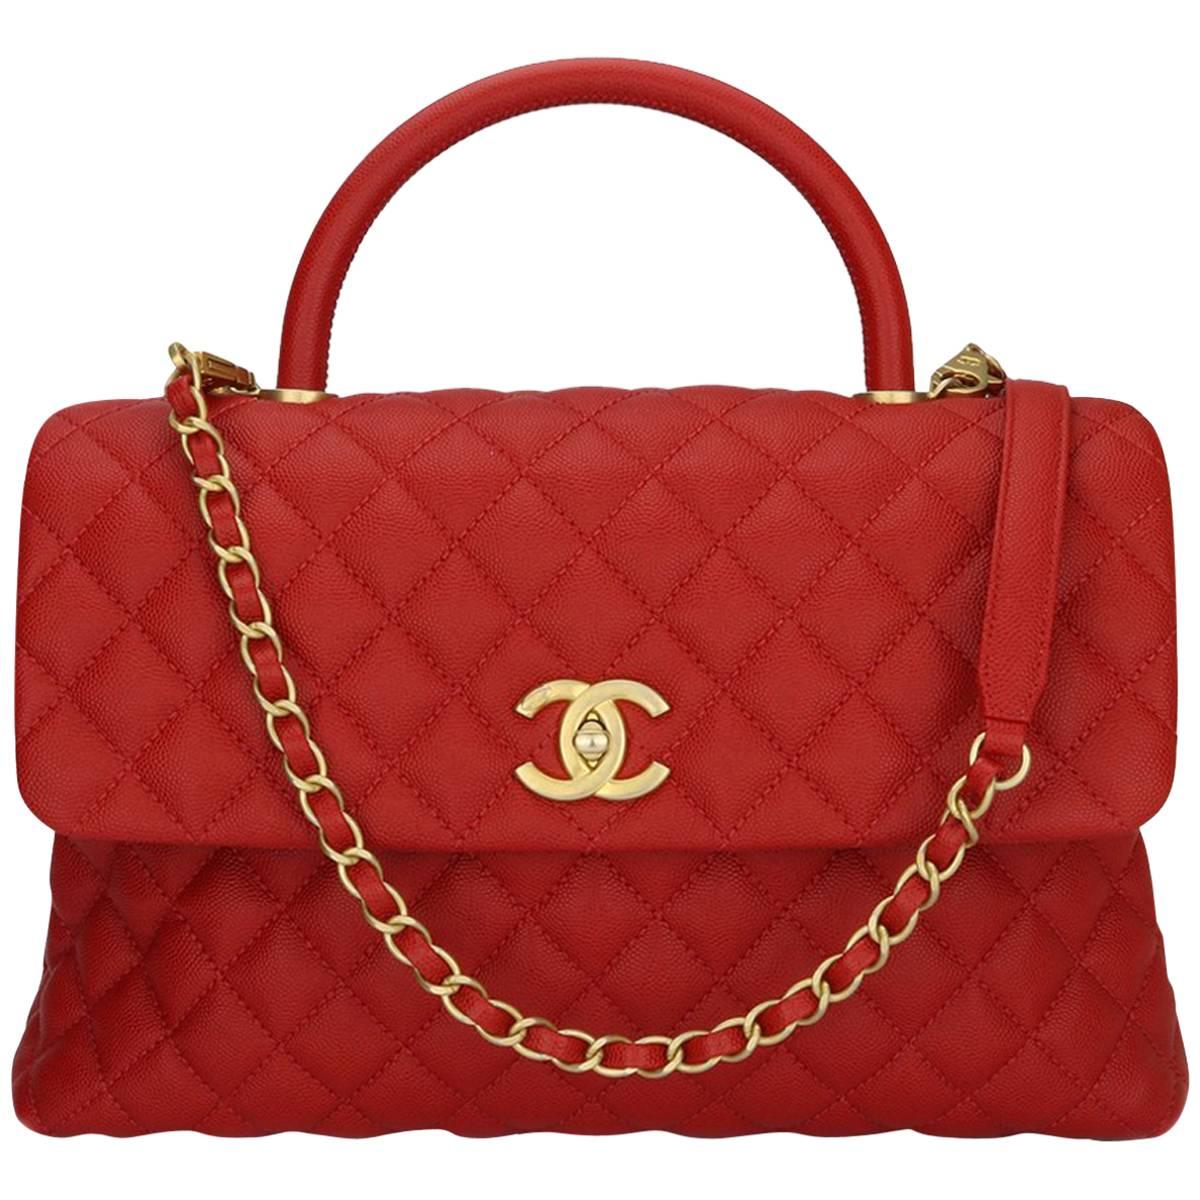 Chanel Coco Handle Large Red Caviar bag with Brushed Gold Hardware, 2018